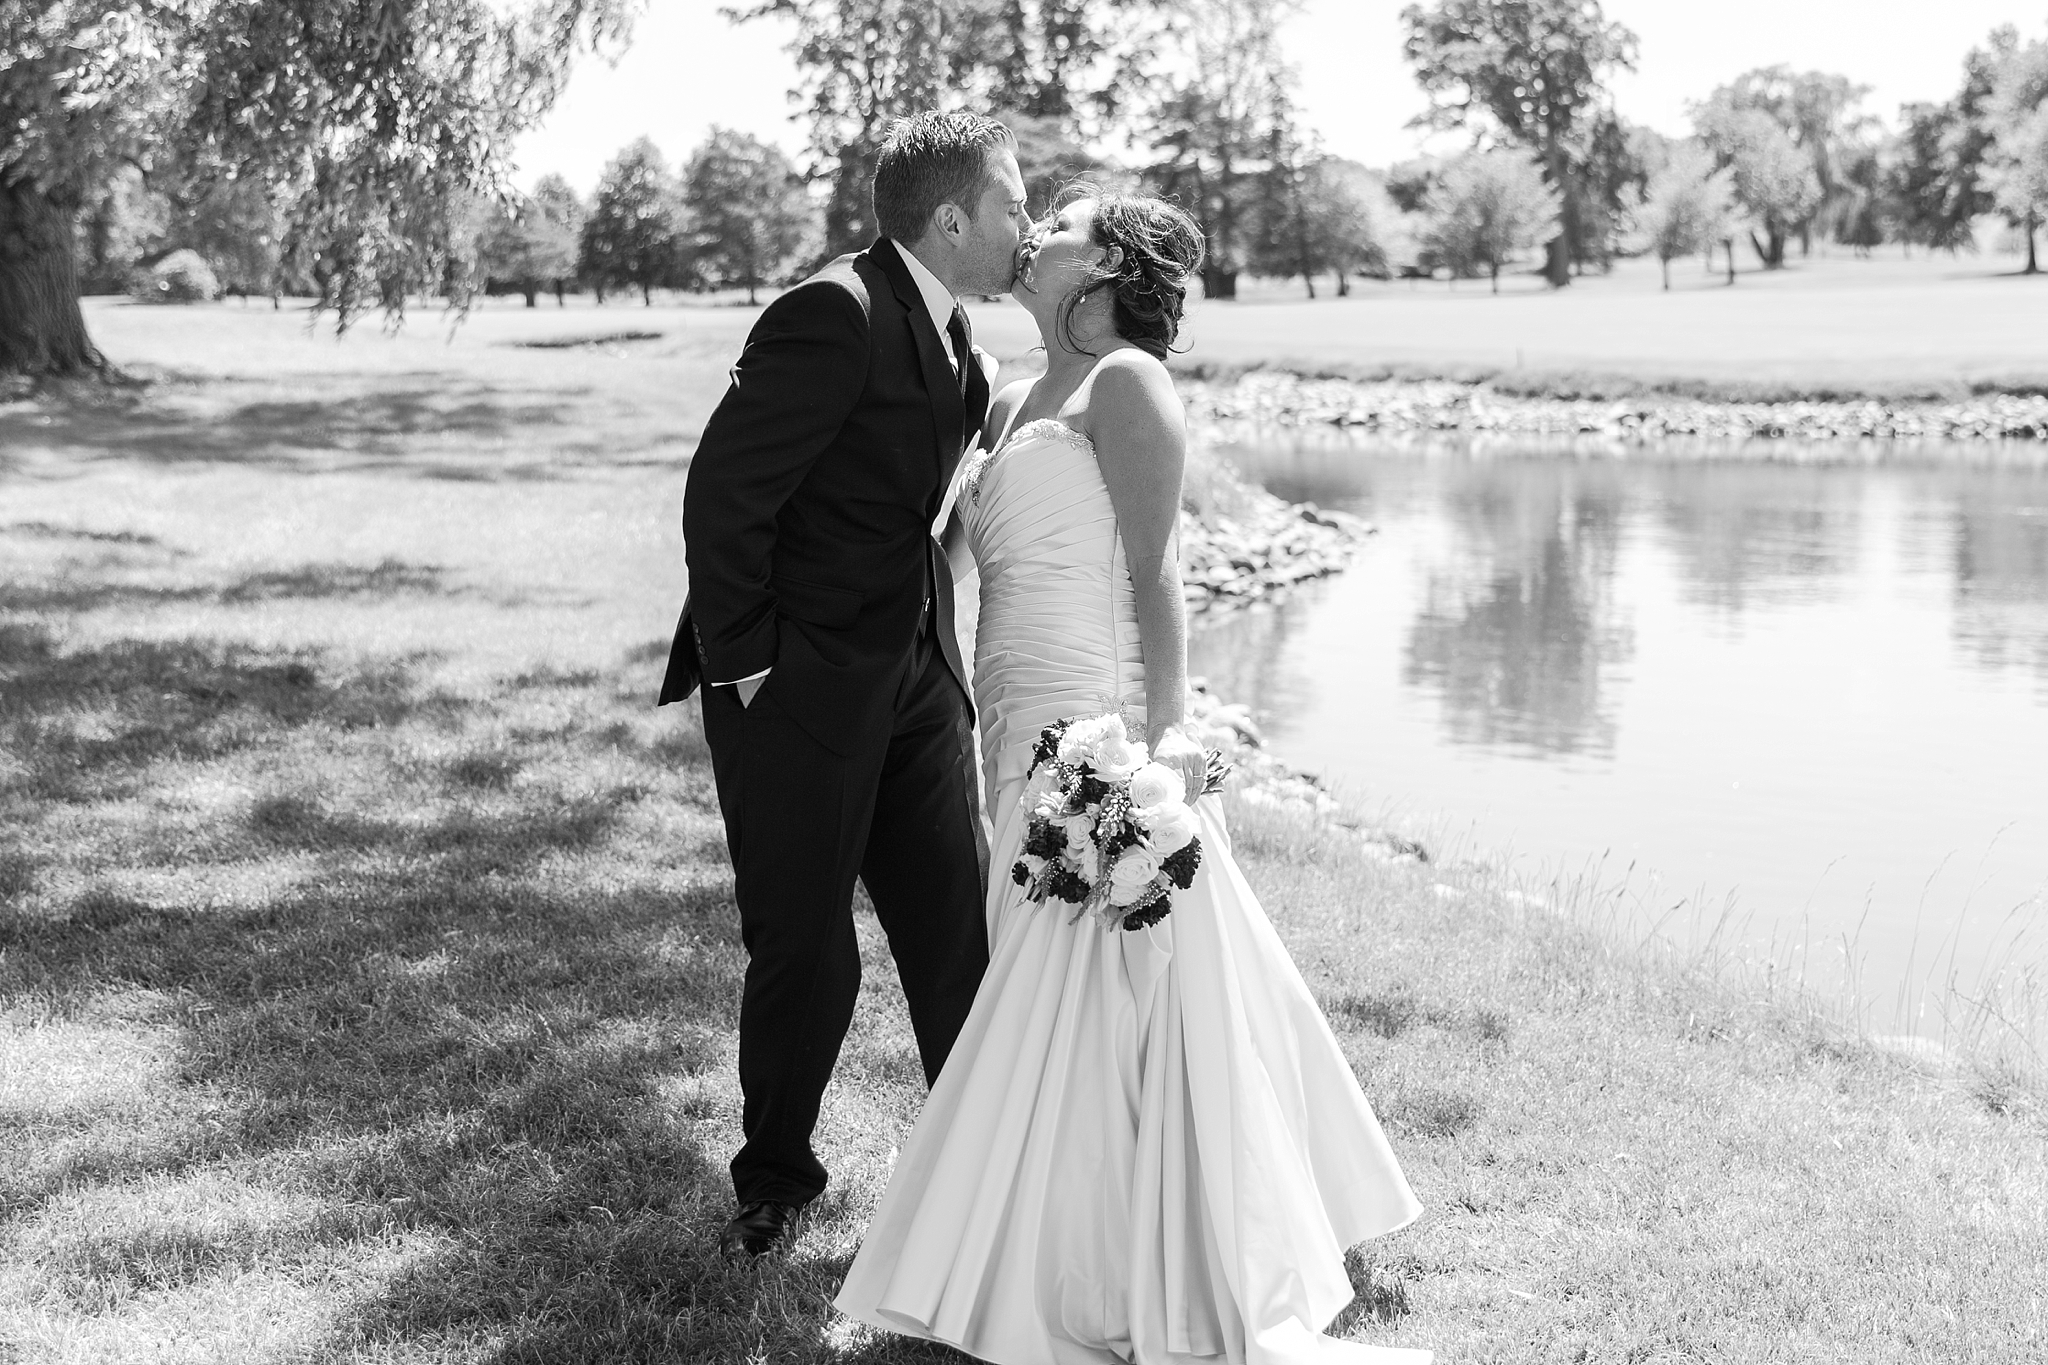 romantic-artful-candid-wedding-photos-in-detroit-lansing-ann-arbor-northern-michigan-and-chicago-by-courtney-carolyn-photography_0064.jpg